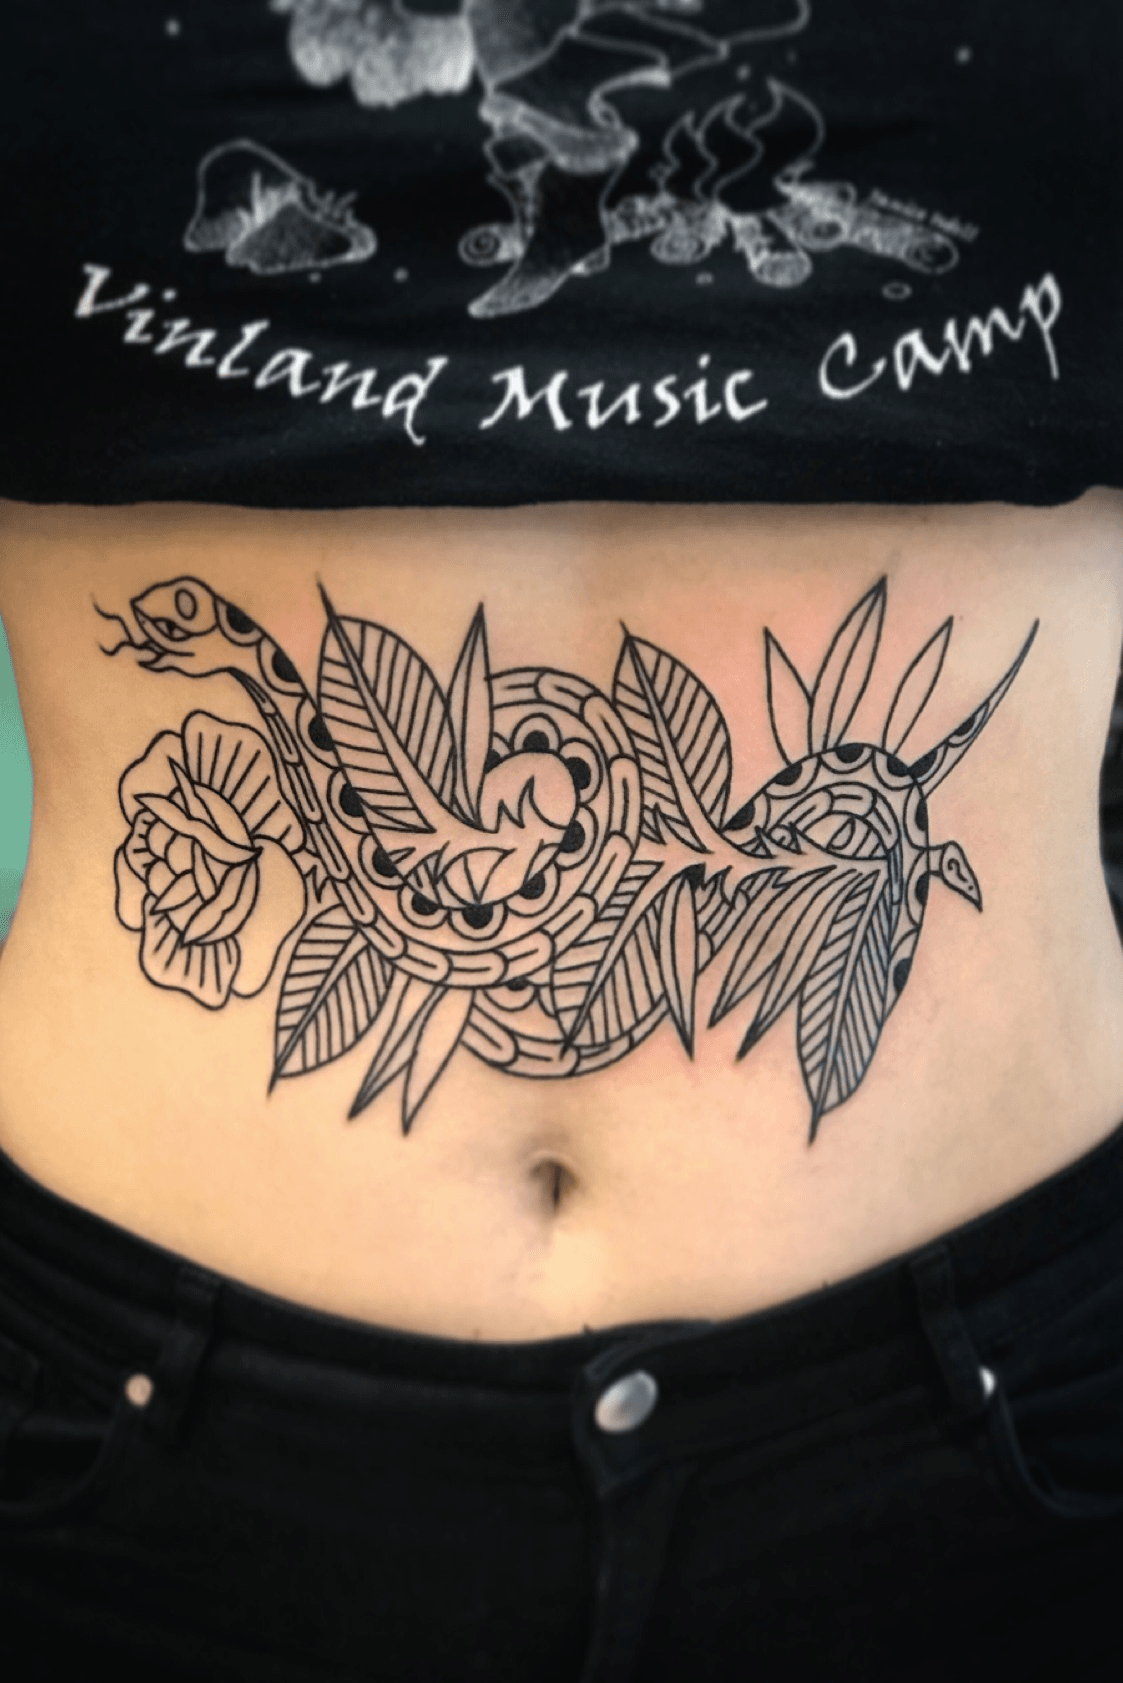 Tattoo uploaded by Tasha Terror • Started this tummy blaster! More to come!  • Tattoodo